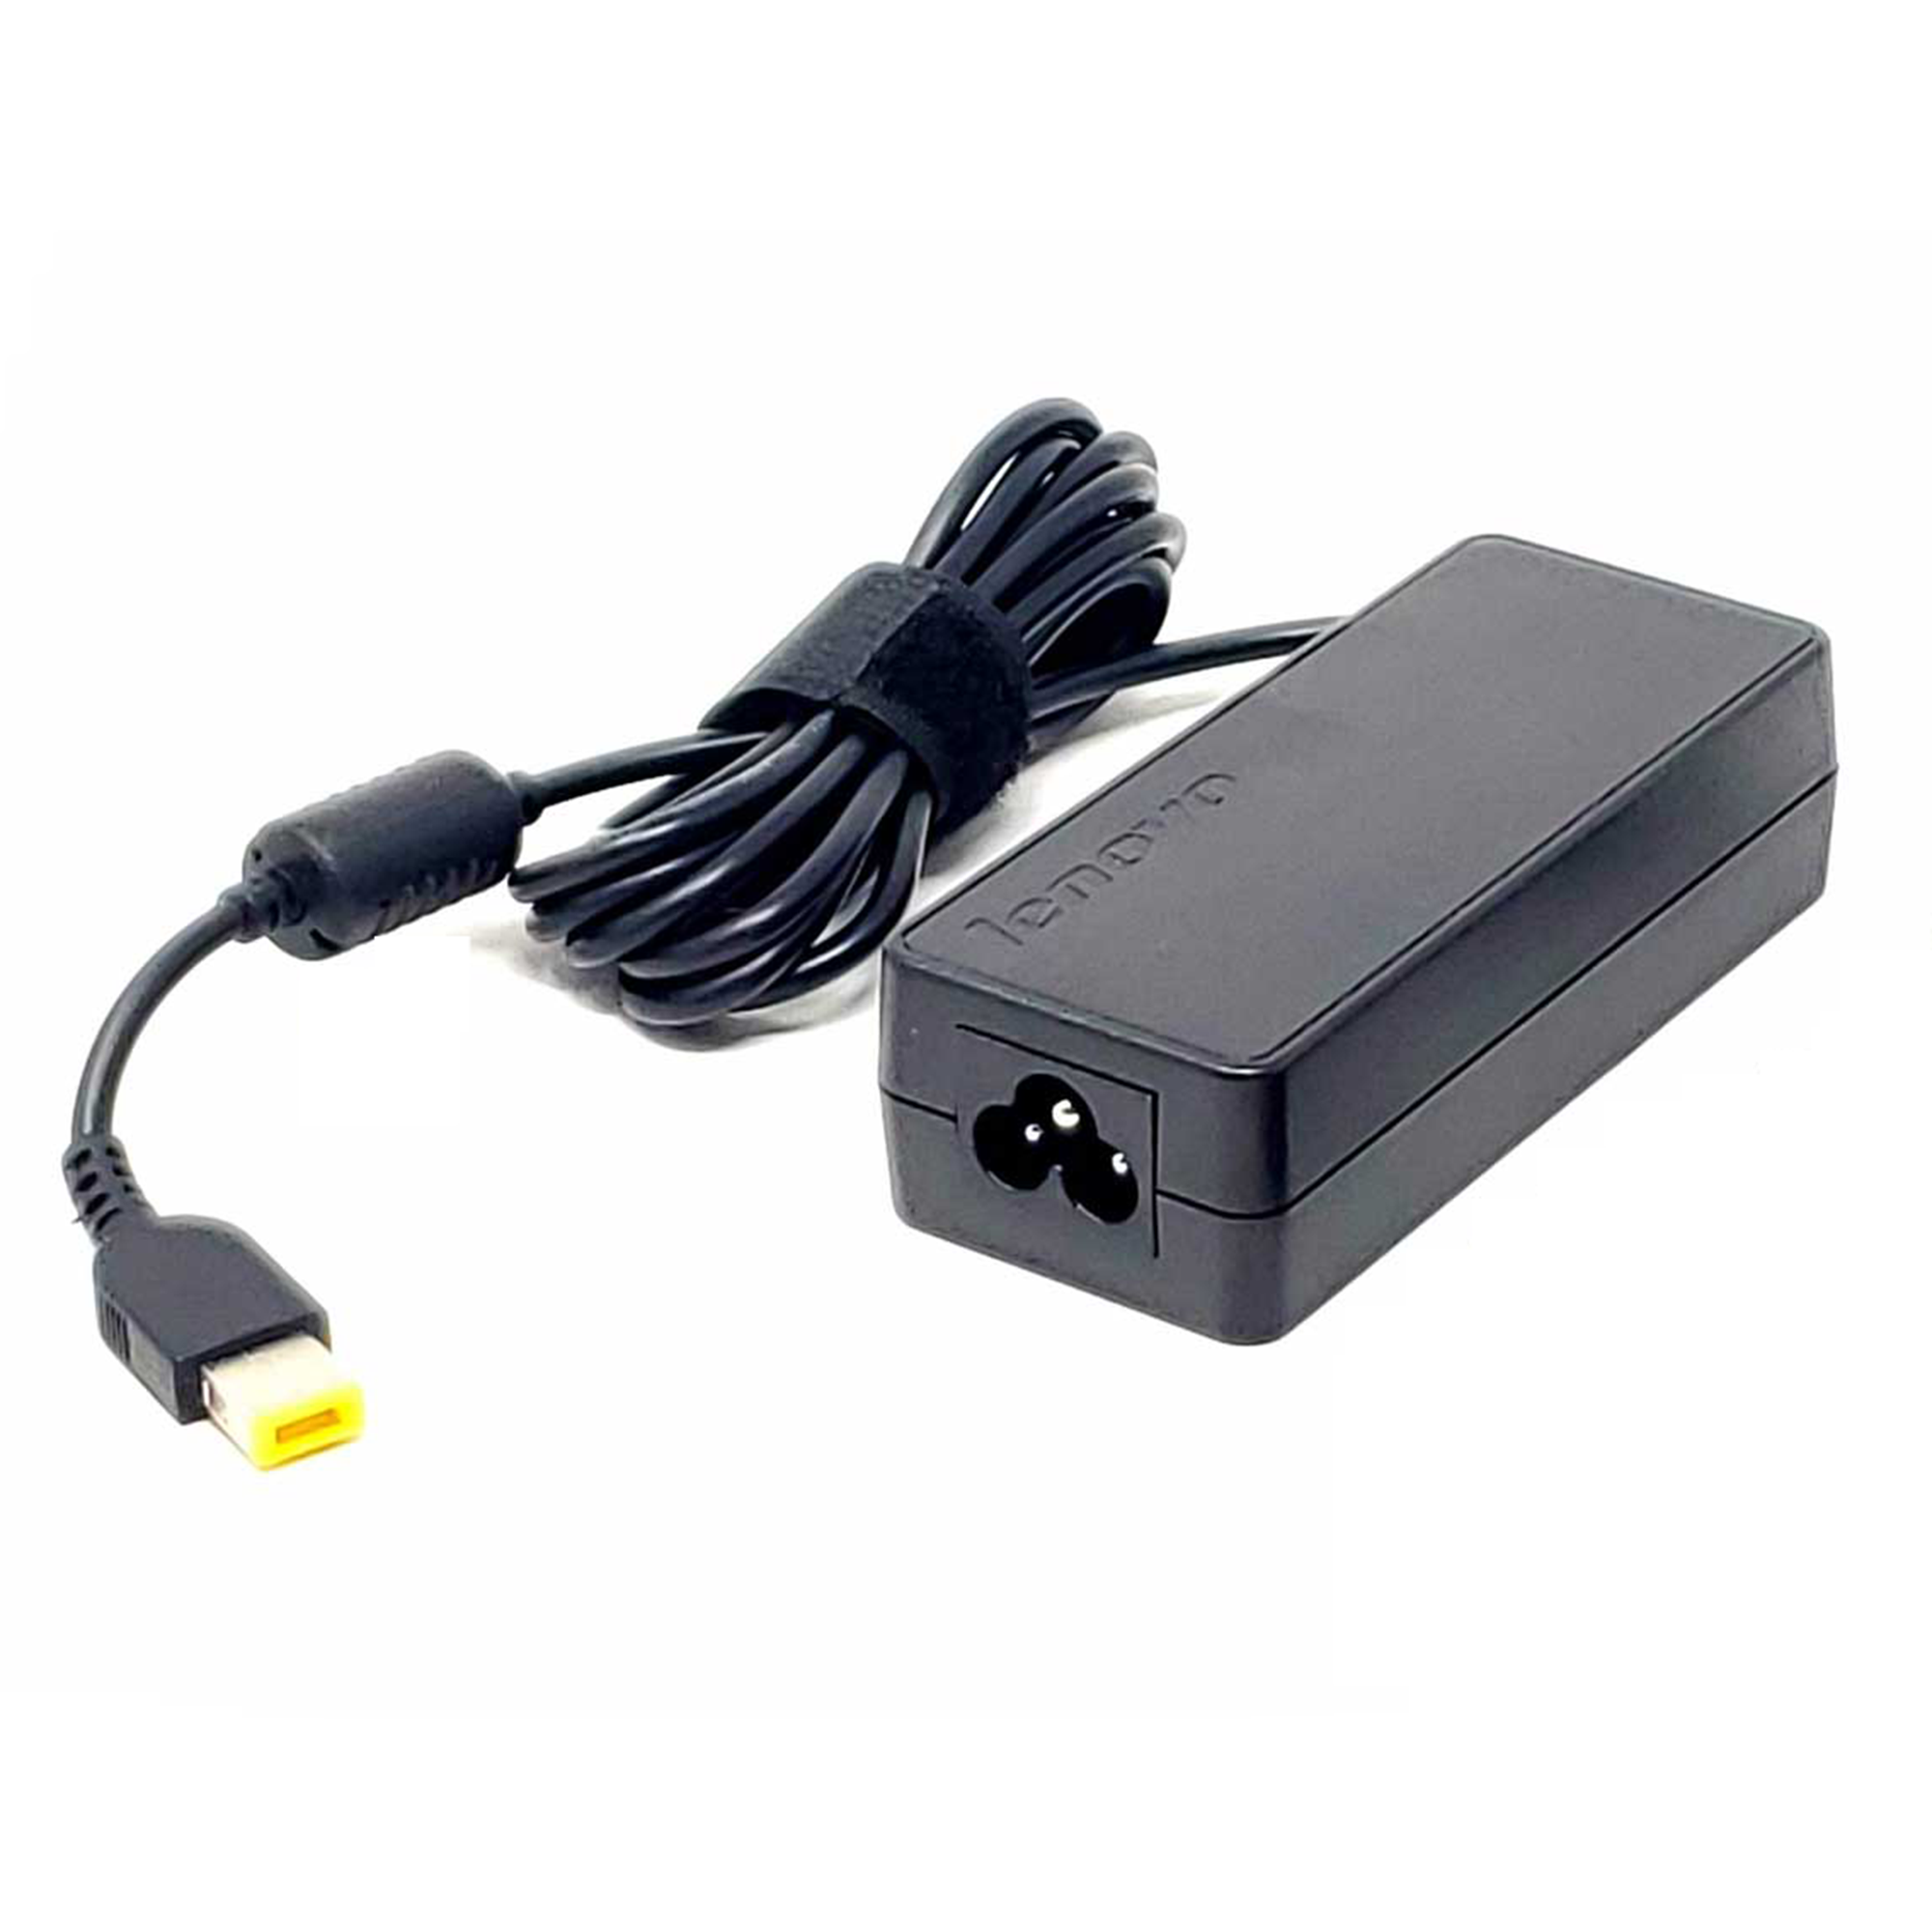 Laptop Charger 65w with Rectangle USB Connector for Lenovo Thinkpad